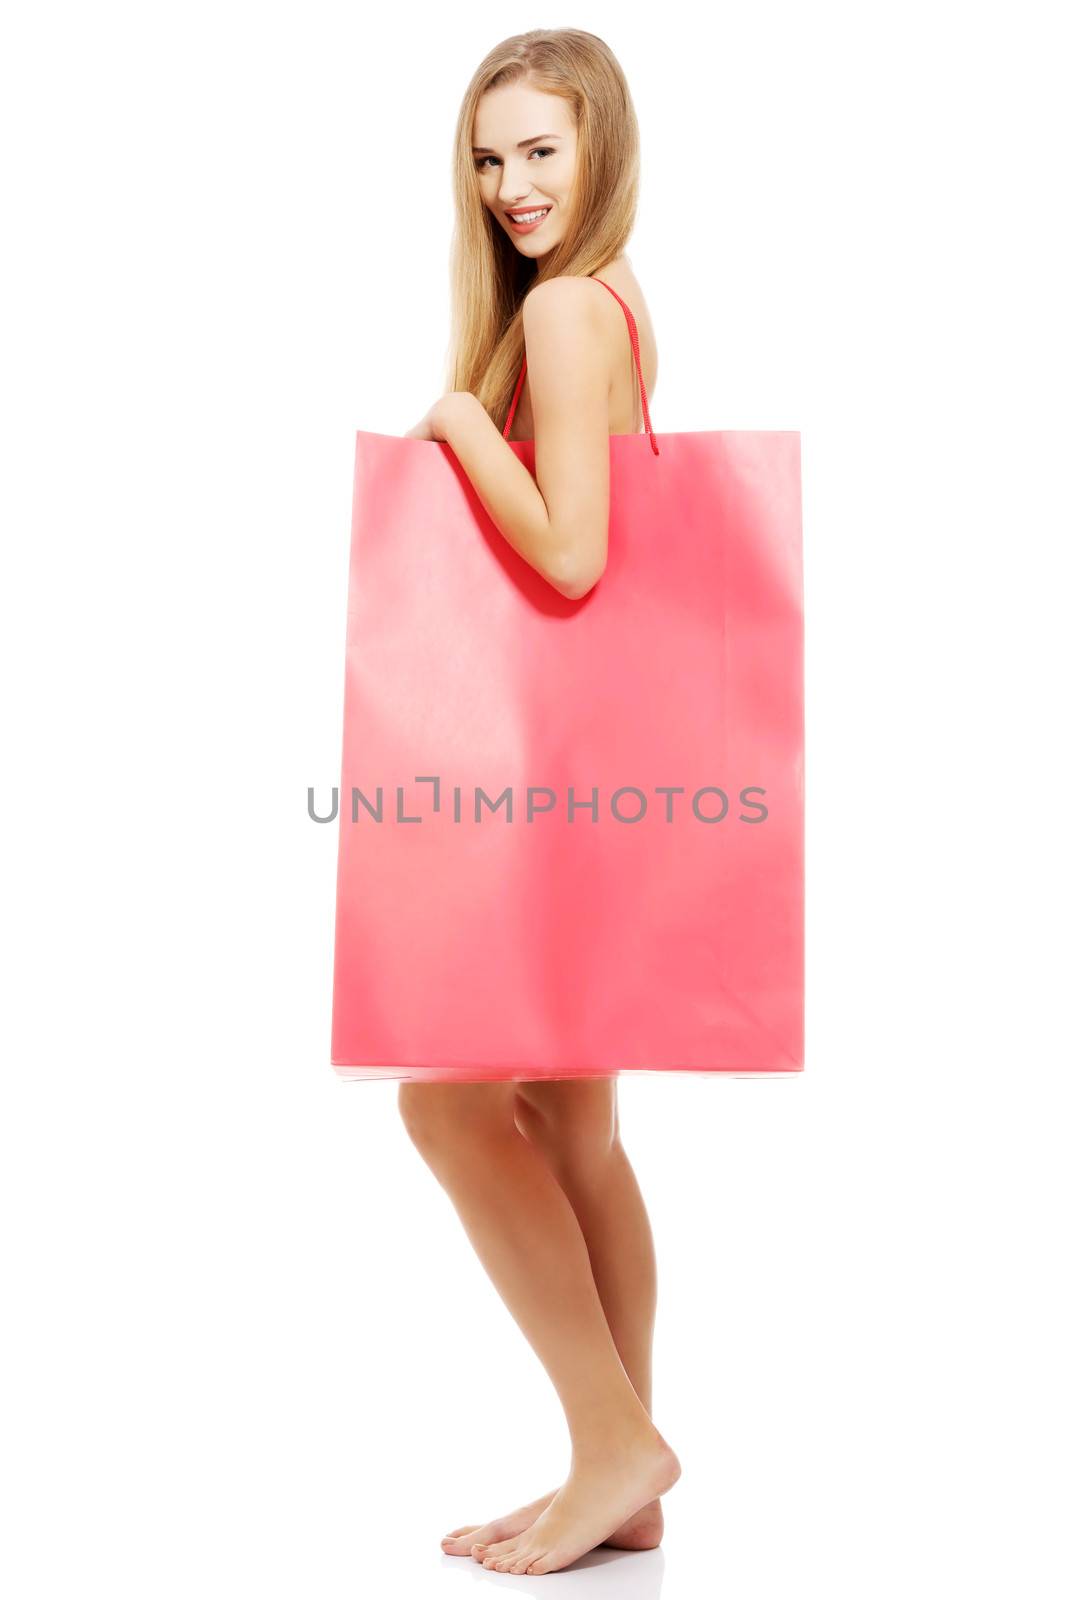 Beautiful naked woman with big red shopping bag. by BDS